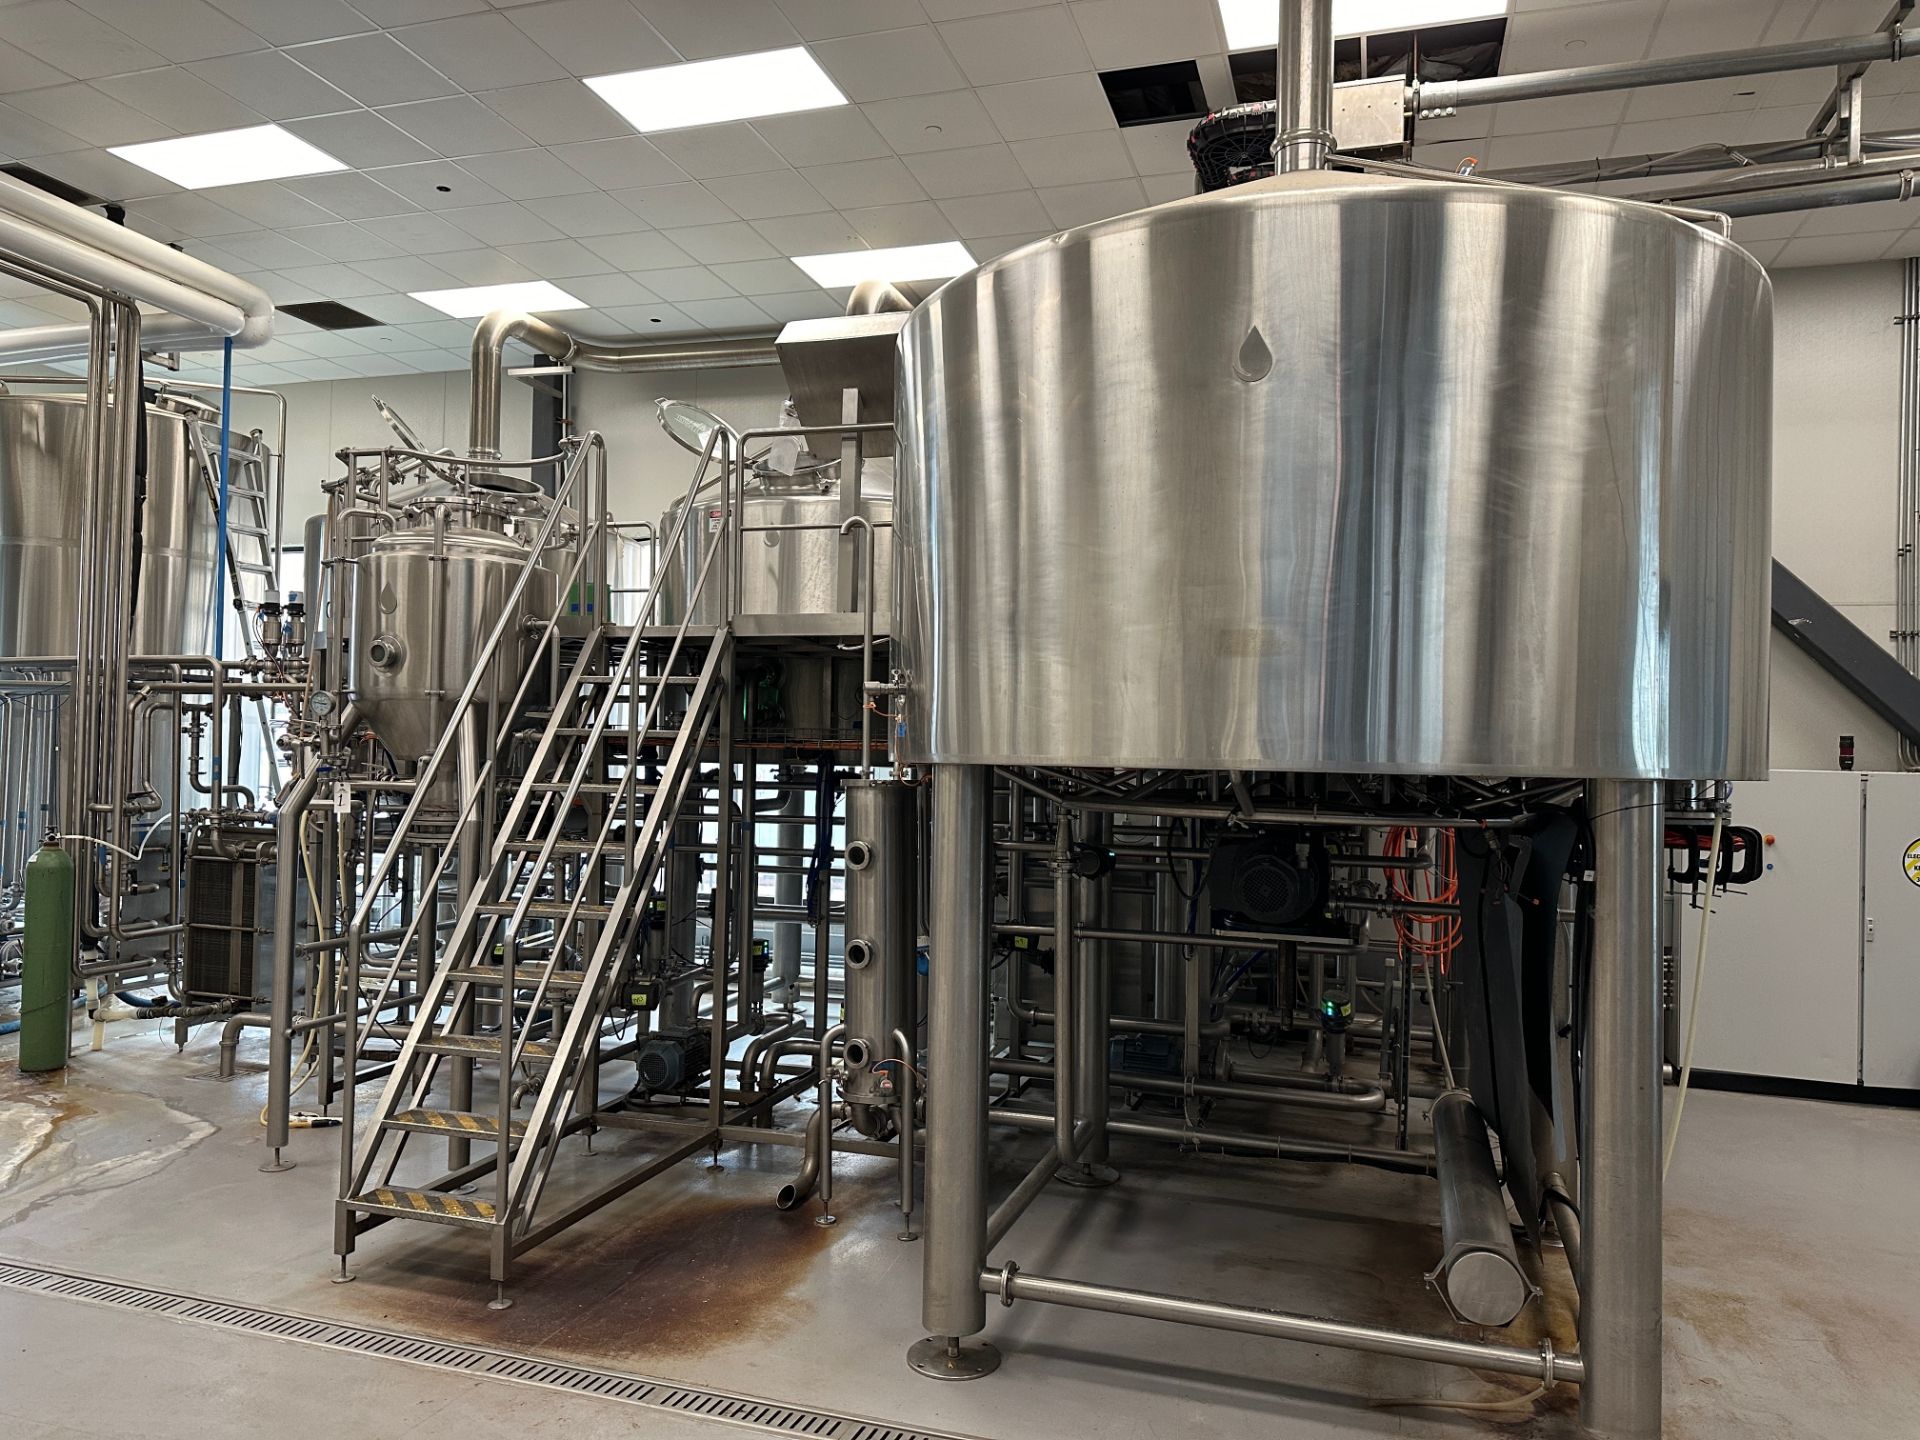 Complete 40 BBL Microbrewery - 40 BBL Deutsche 4-Vessel Brewhouse, Tanks, Can Line - See Description - Image 3 of 335